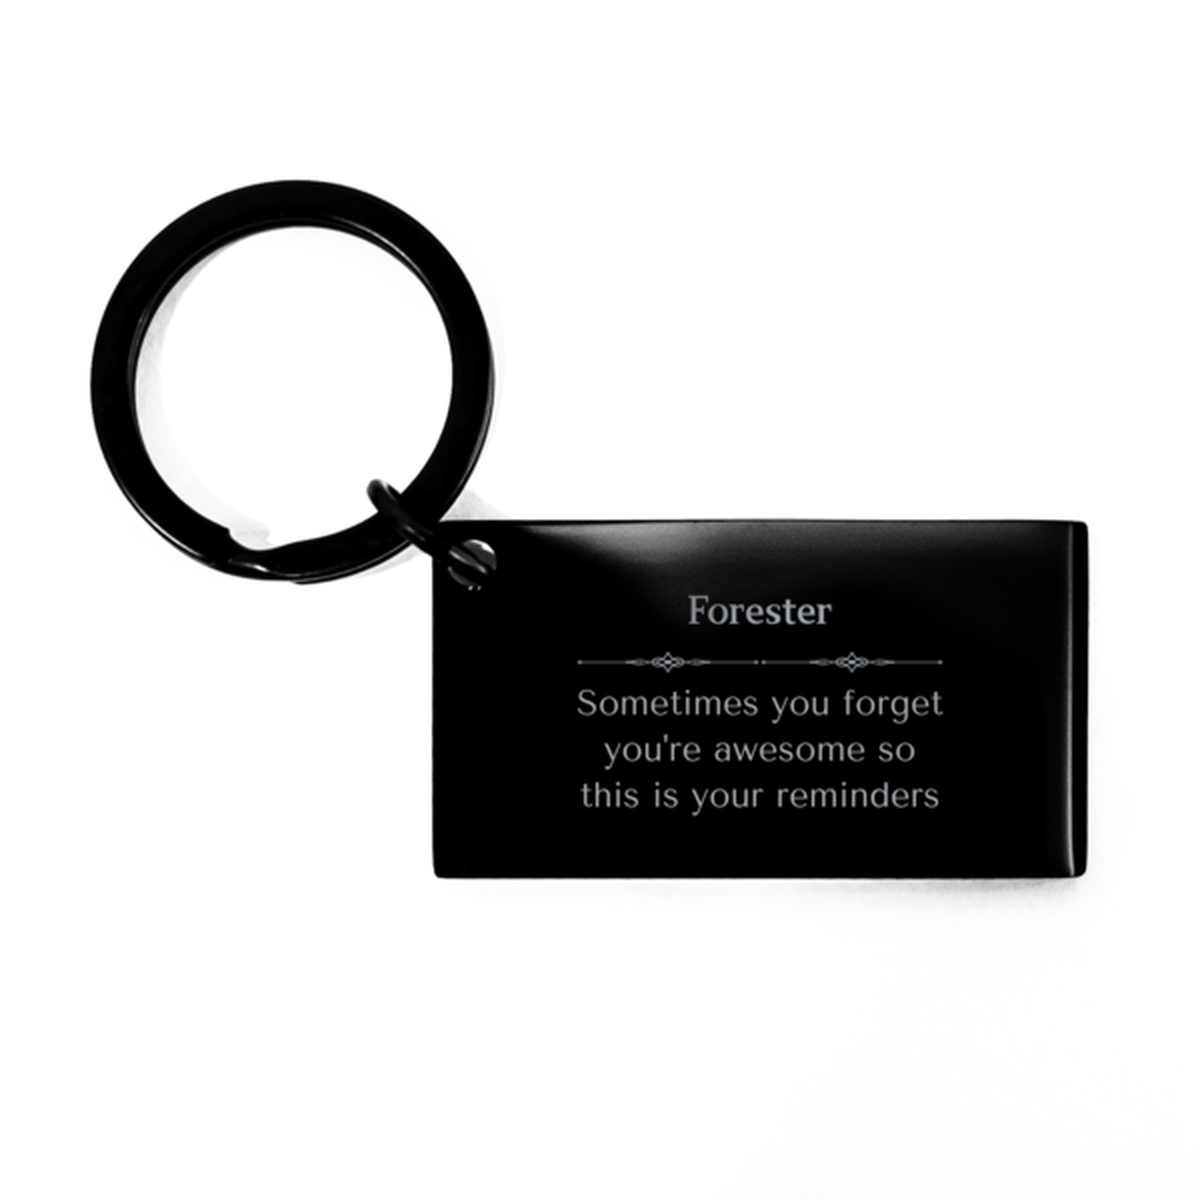 Sentimental Forester Keychain, Logger Sometimes you forget you're awesome so this is your reminders, Graduation Christmas Birthday Gifts for Forester, Men, Women, Coworkers